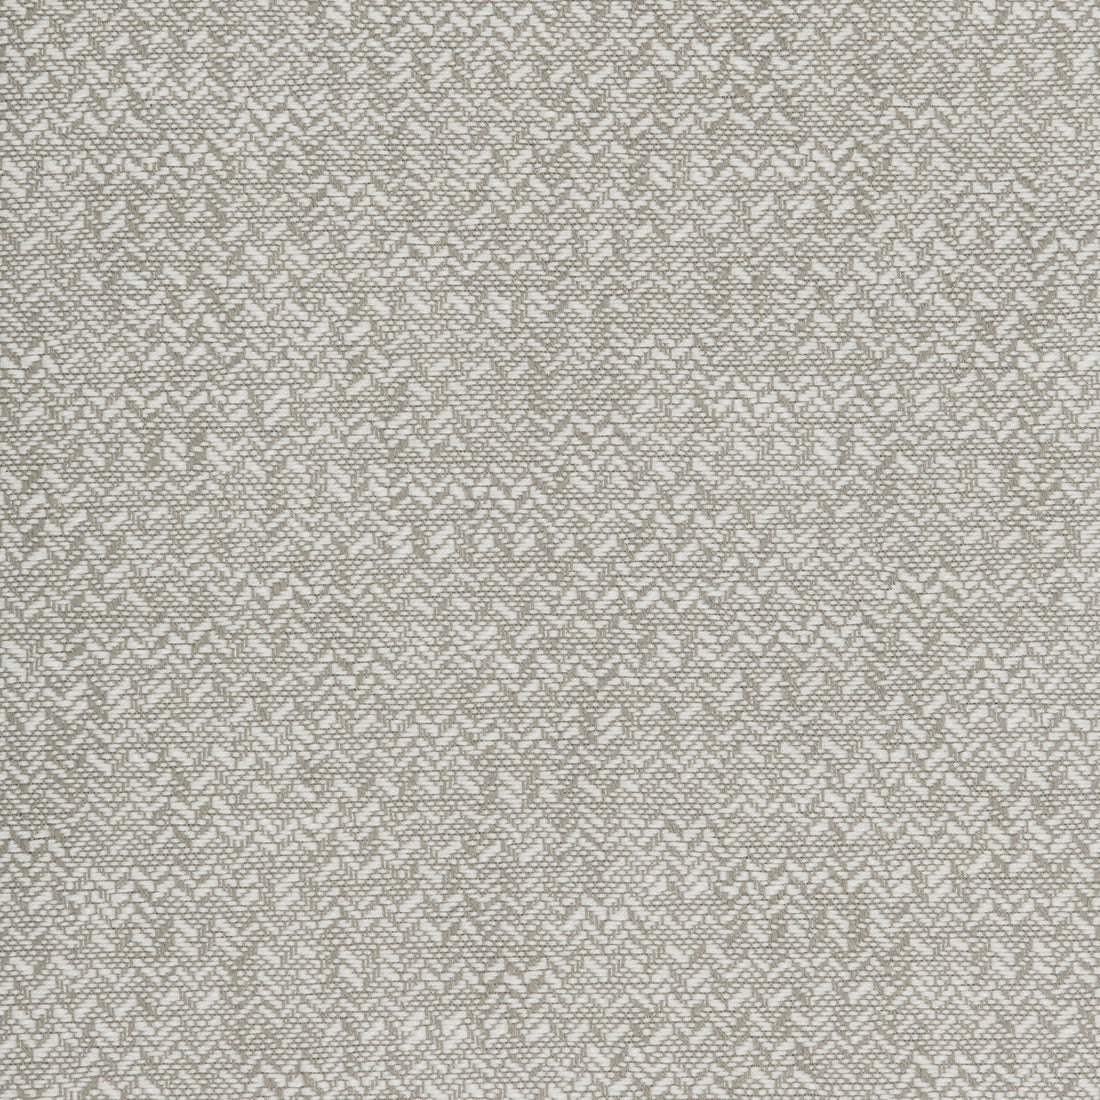 Kravet Design fabric in 36089-11 color - pattern 36089.11.0 - by Kravet Design in the Inside Out Performance Fabrics collection